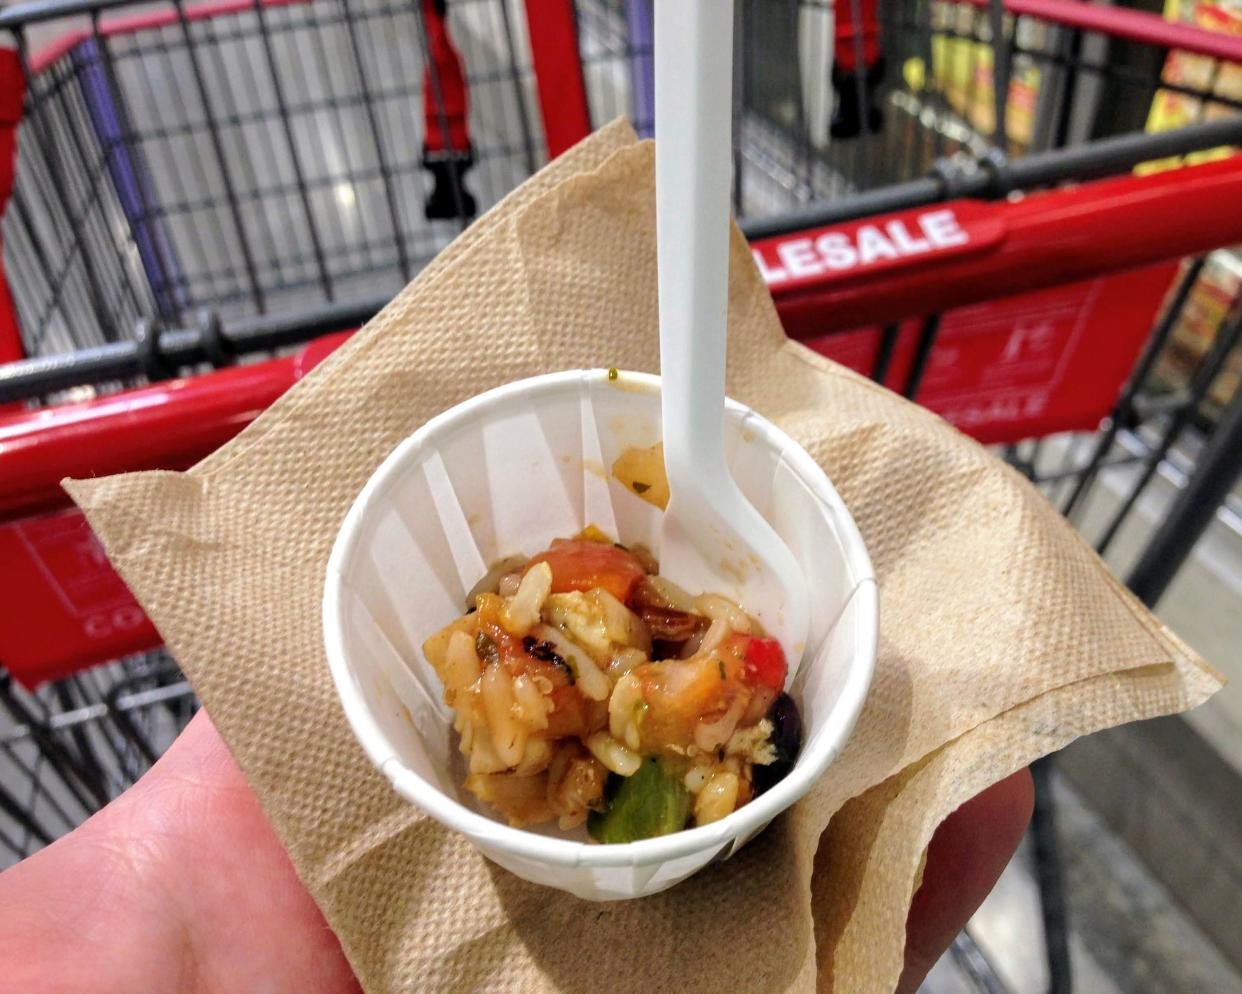 A hand holding a food sample in Costco